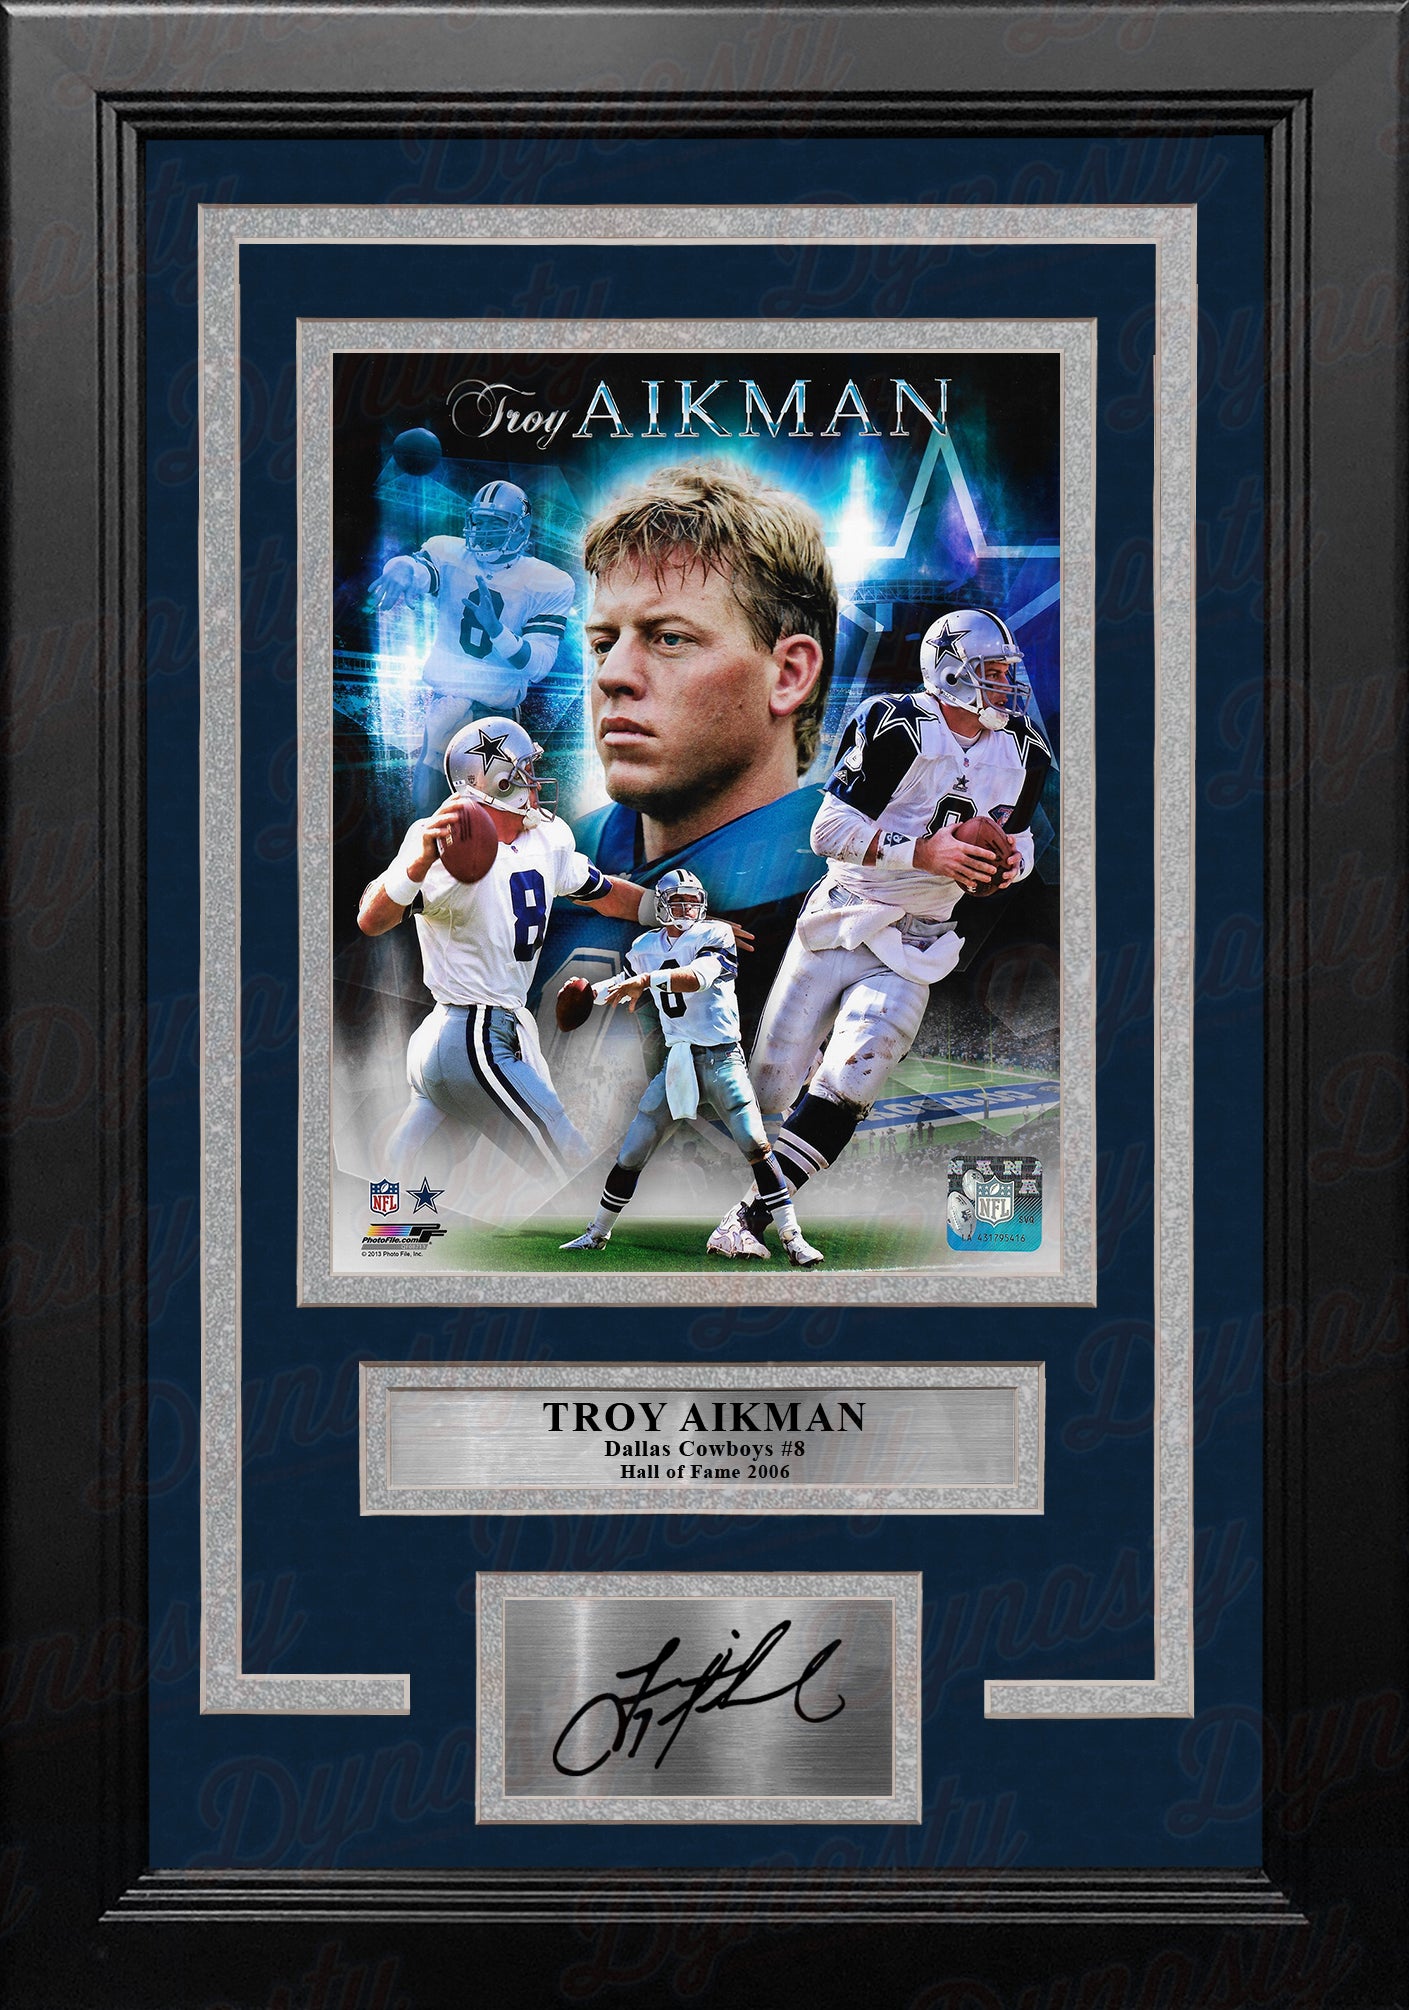 Troy Aikman Dallas Cowboys 8" x 10" Framed Football Collage Photo with Engraved Autograph - Dynasty Sports & Framing 